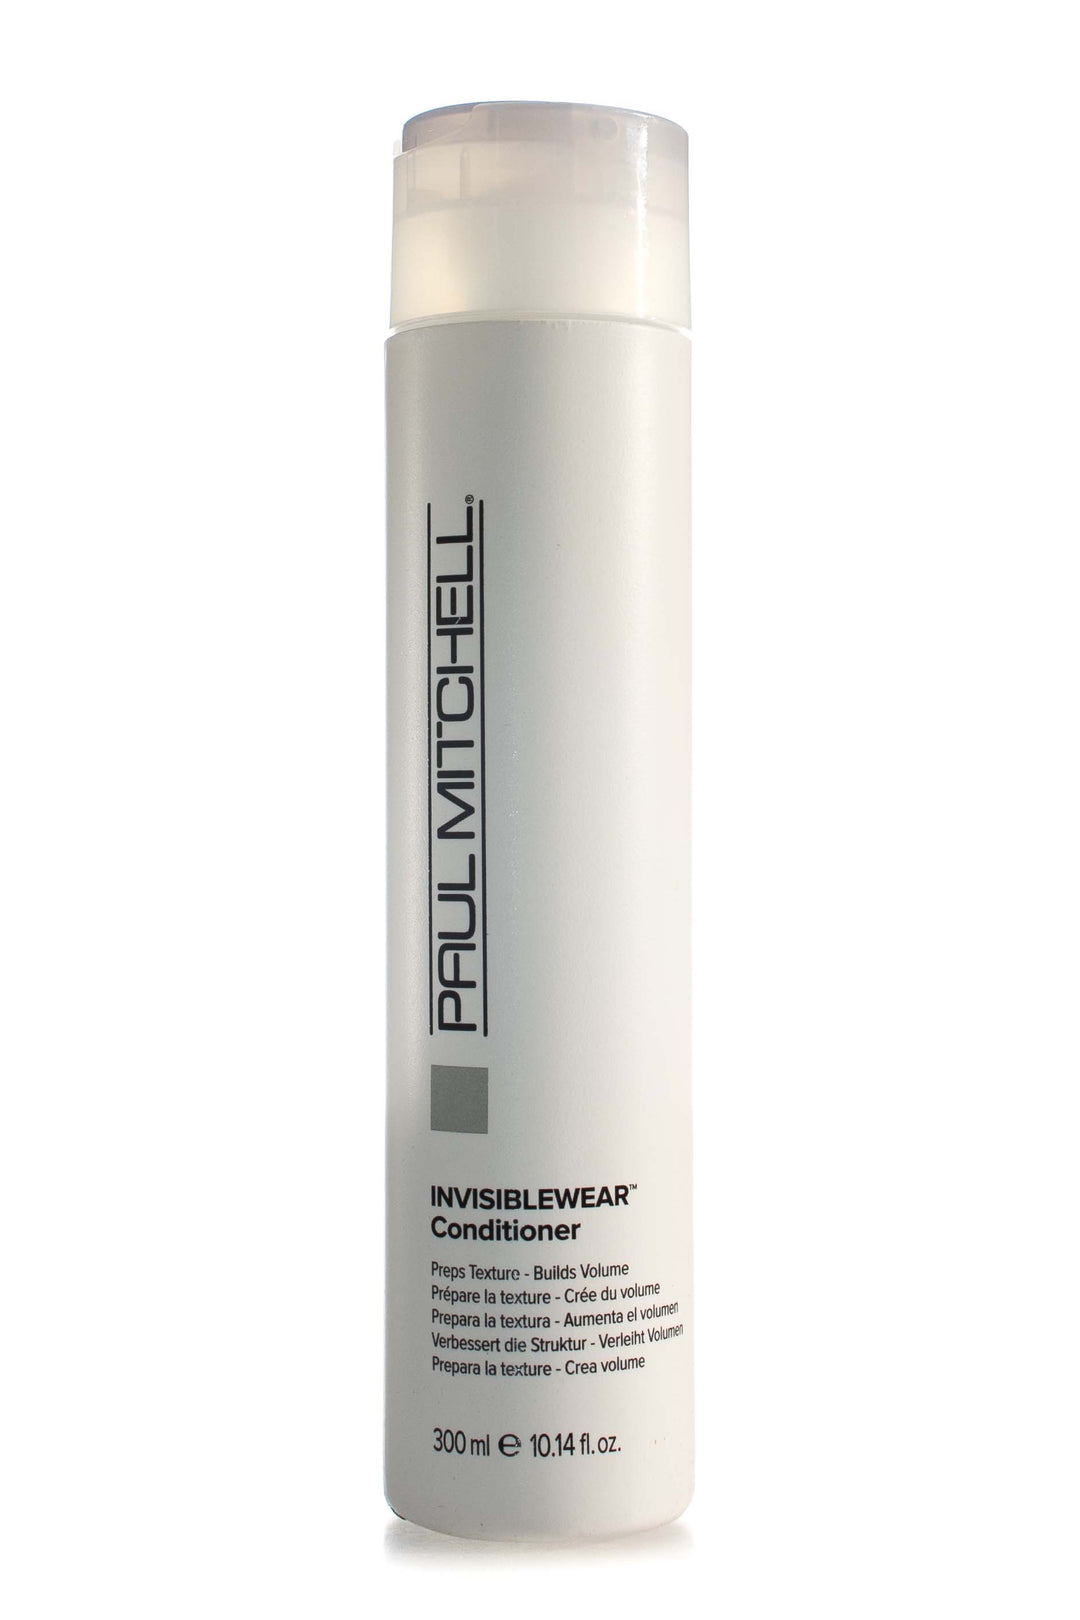 paul-mitchell-invisiblewear-conditioner-300mll